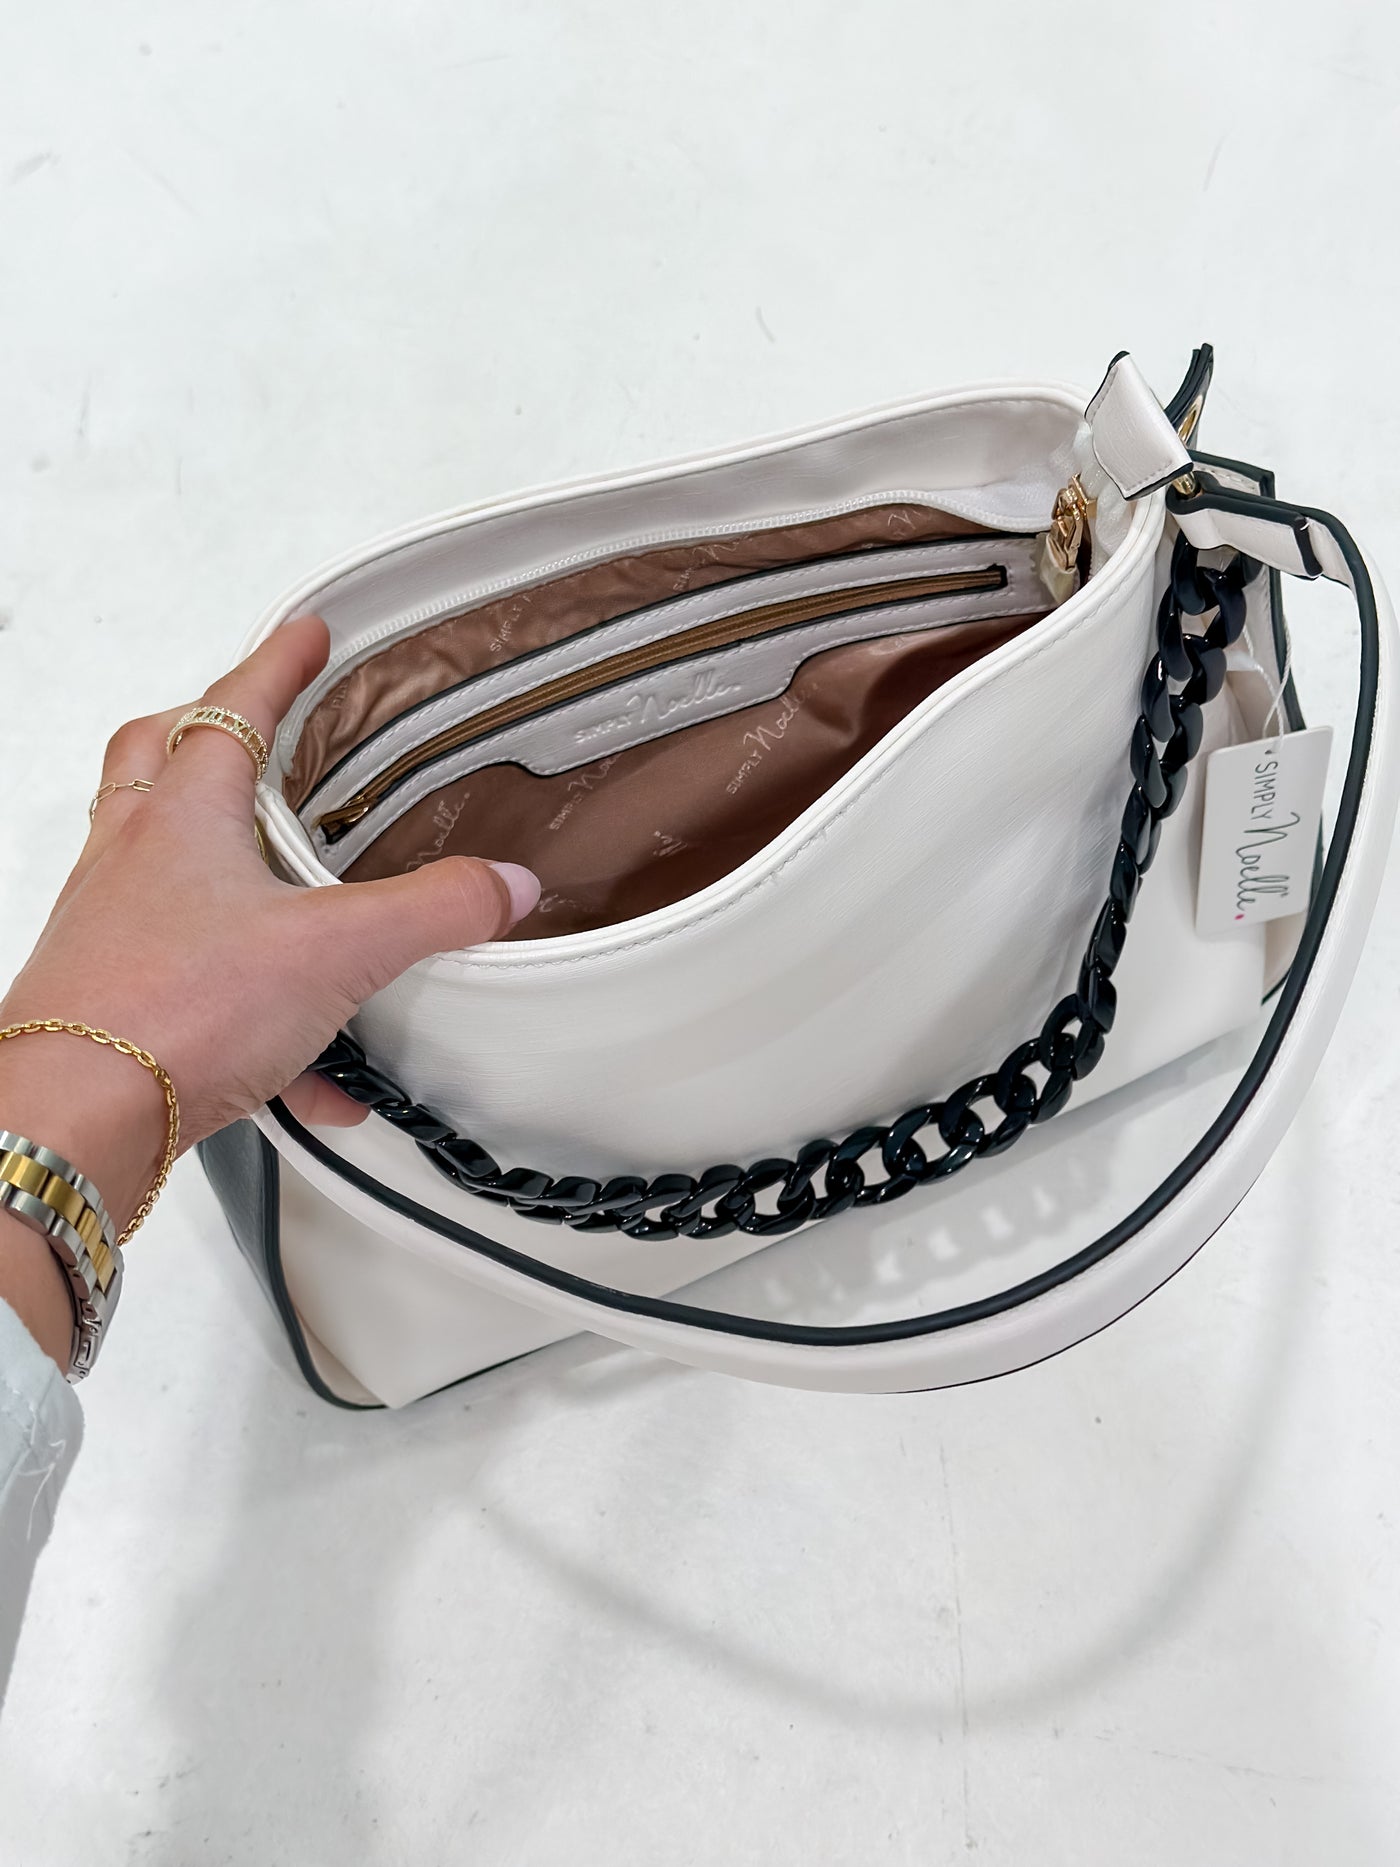 Simply Noelle Textured Chain Hobo